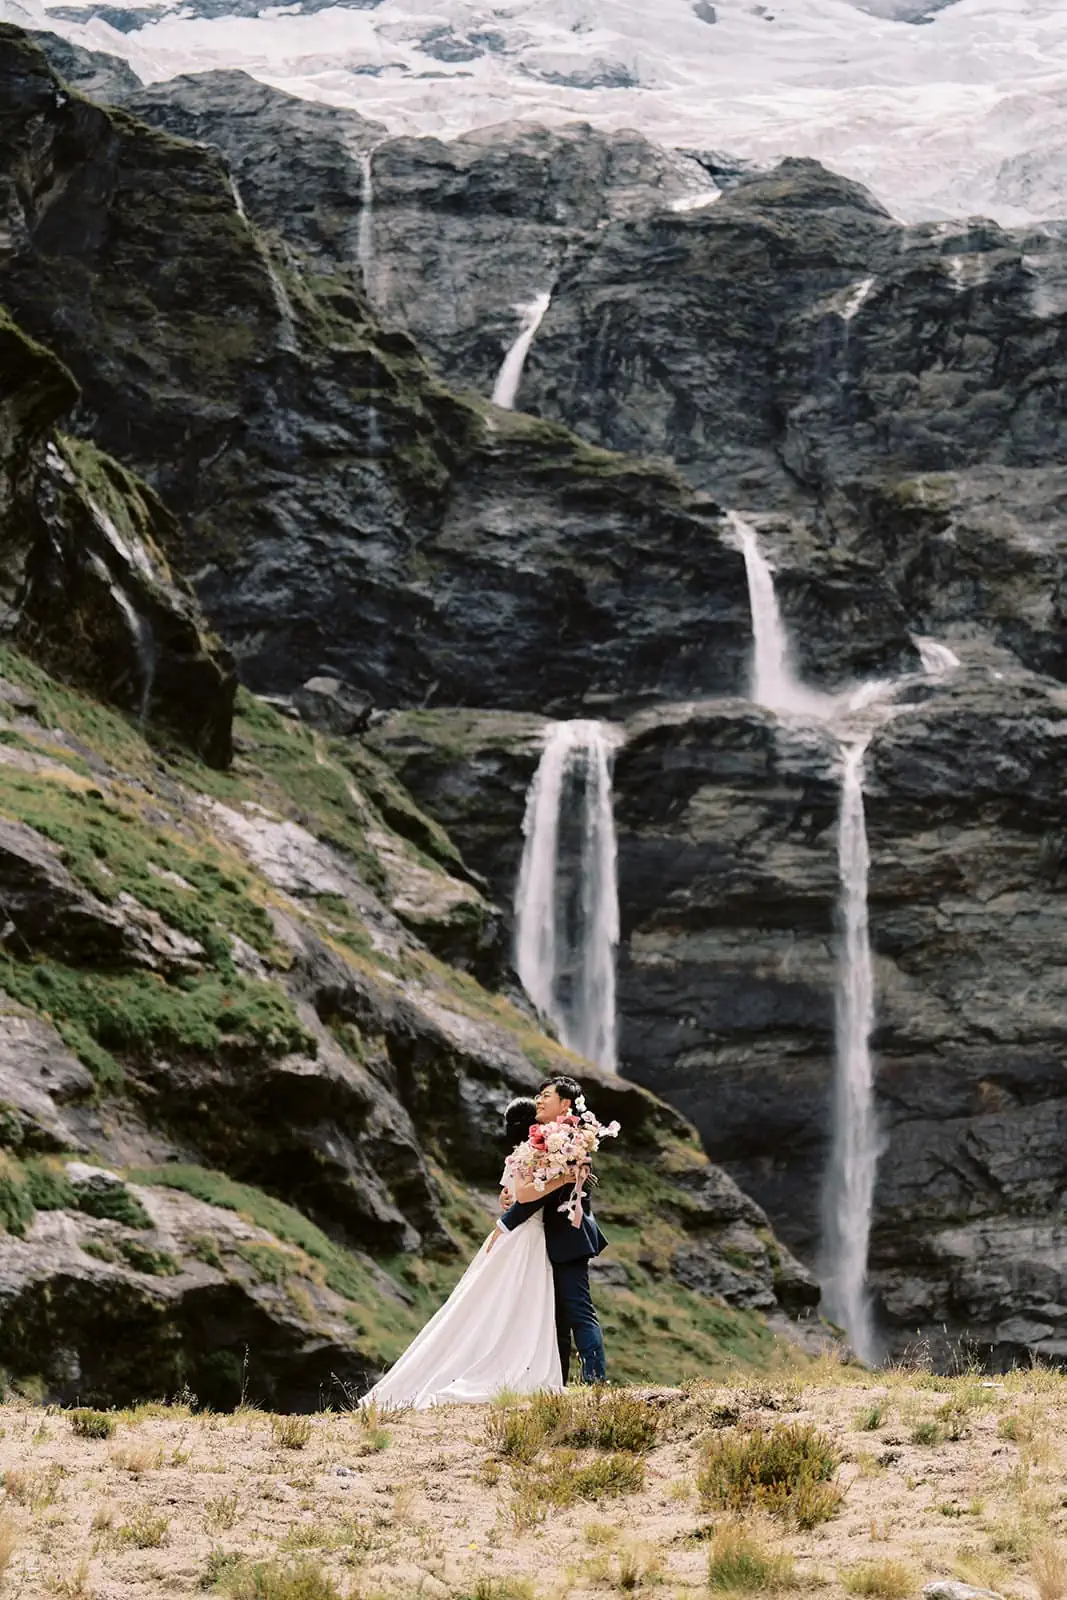 Kyoto Tokyo Japan Elopement Wedding Photographer, Planner & Videographer | A couple embracing in a wedding photoshoot with a waterfall cascading down a mountain in the background, captured by Yuri, a Japan Wedding Photographer.